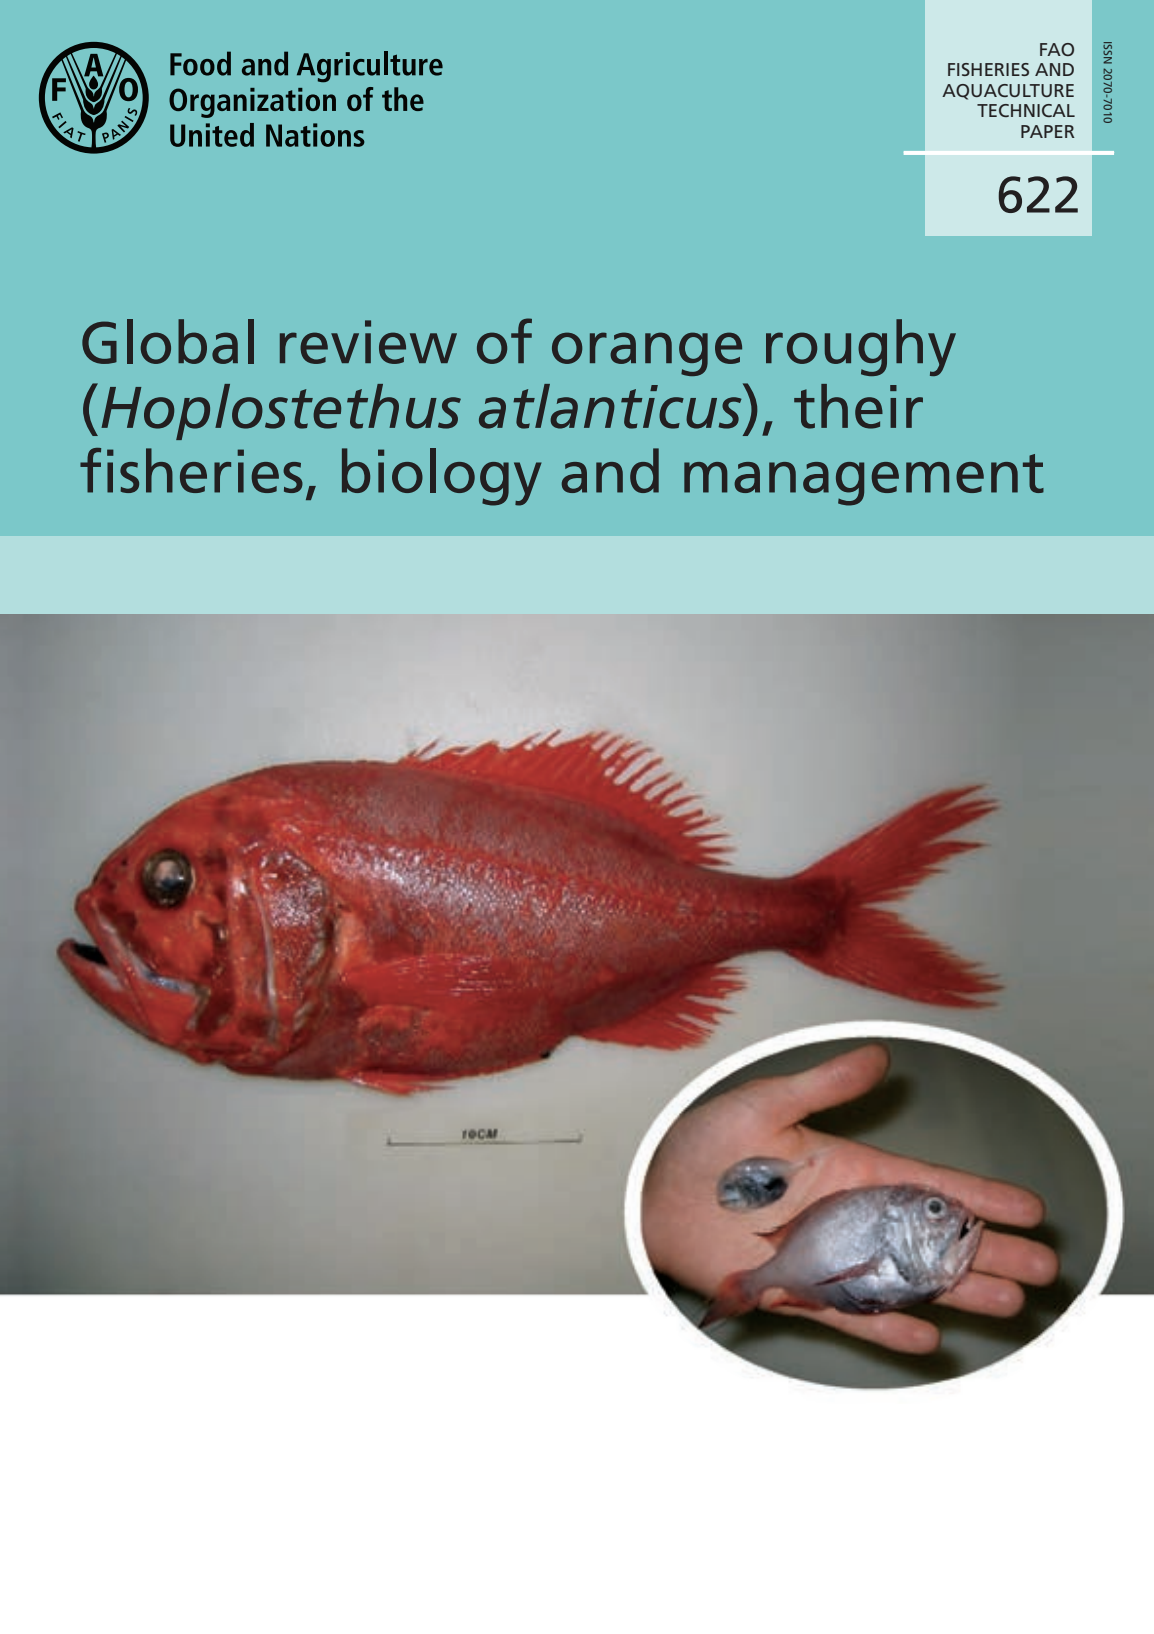 Global review of Orange roughy (Hoplostethus atlanticus), their fisheries, biology and management